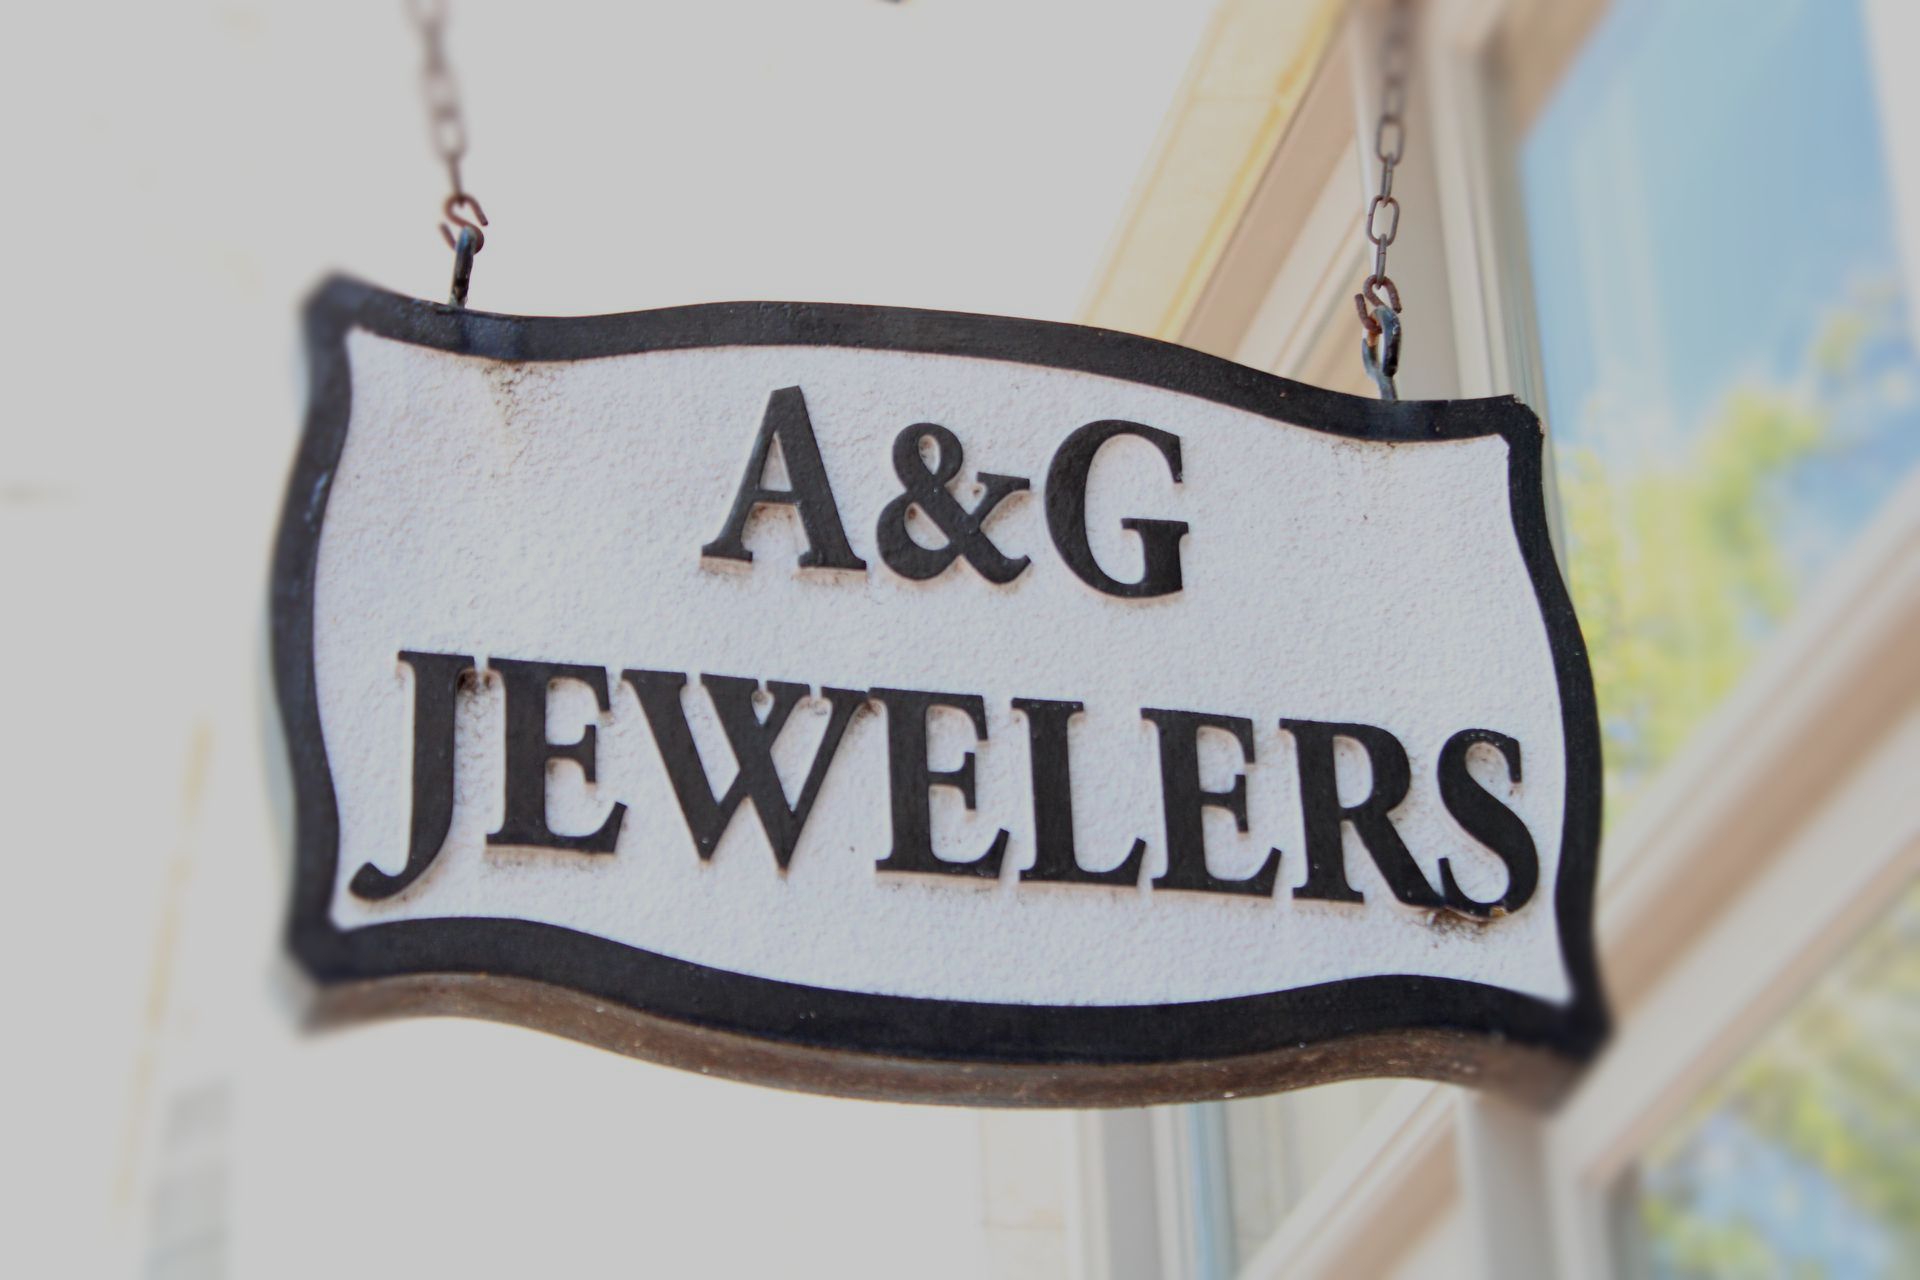 a sign for a & g jewelers hangs from a building